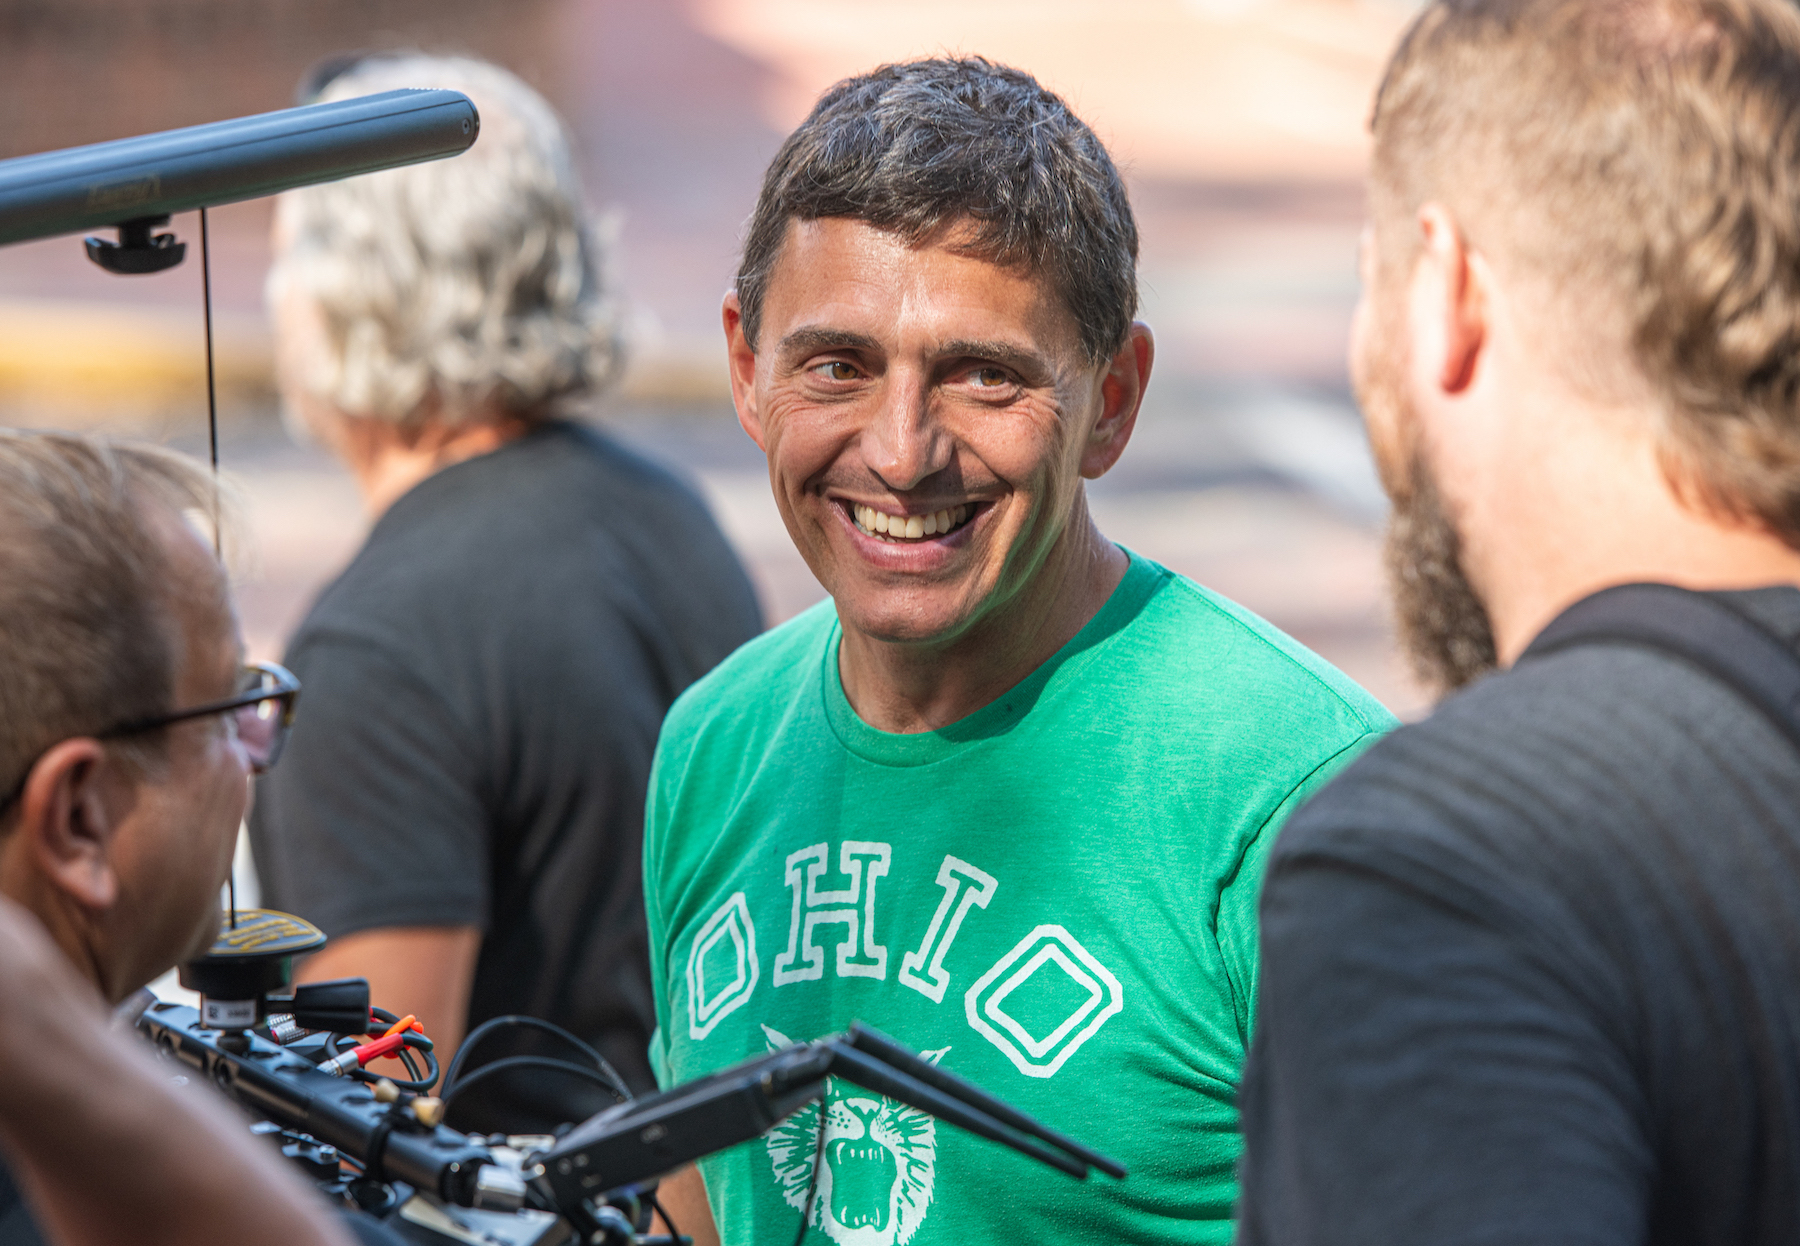 A man wearing a green Ohio University shirt smiles with people huddled around him